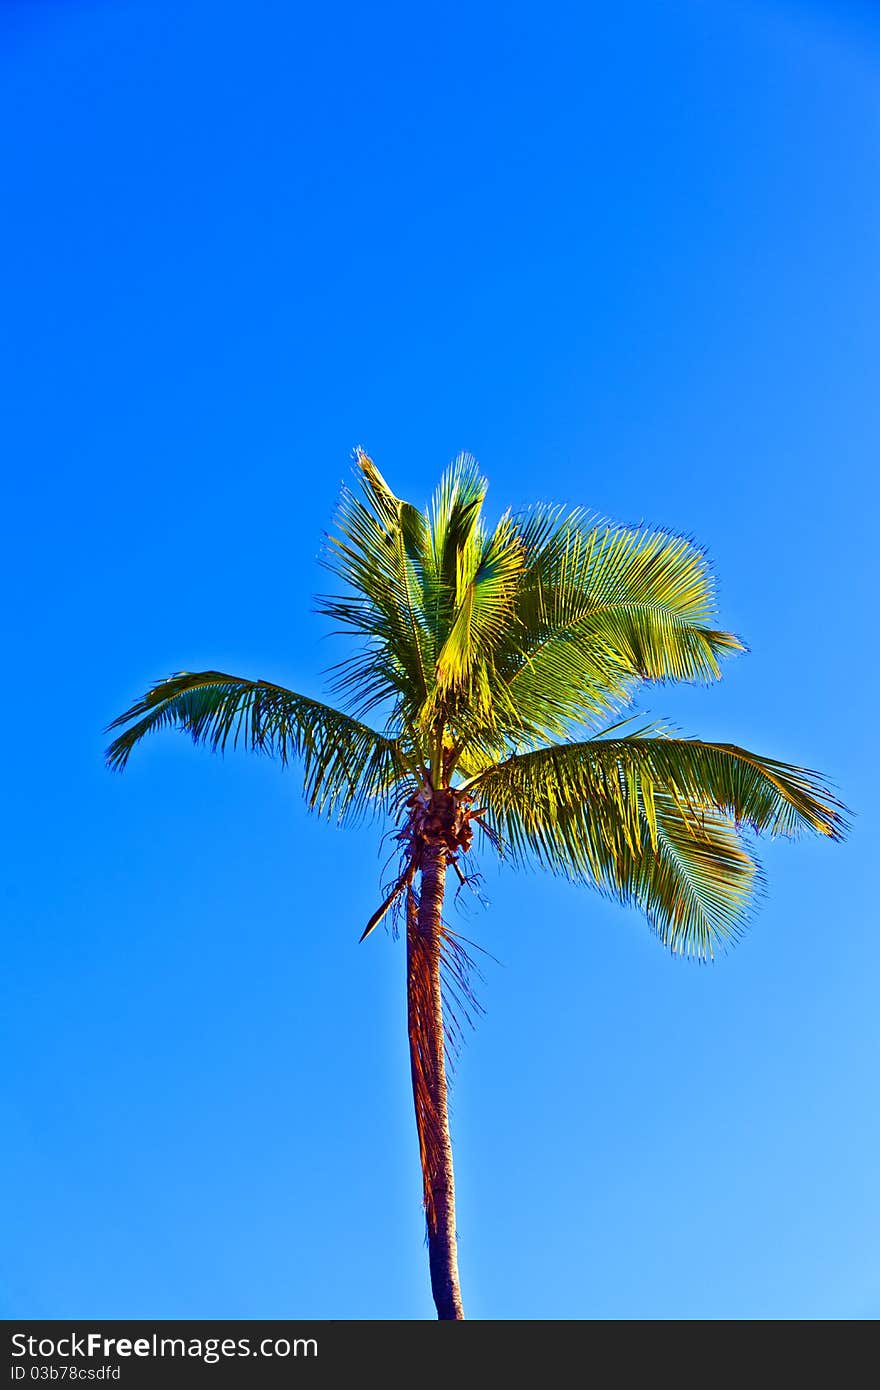 Crown of palm tree with blue sky